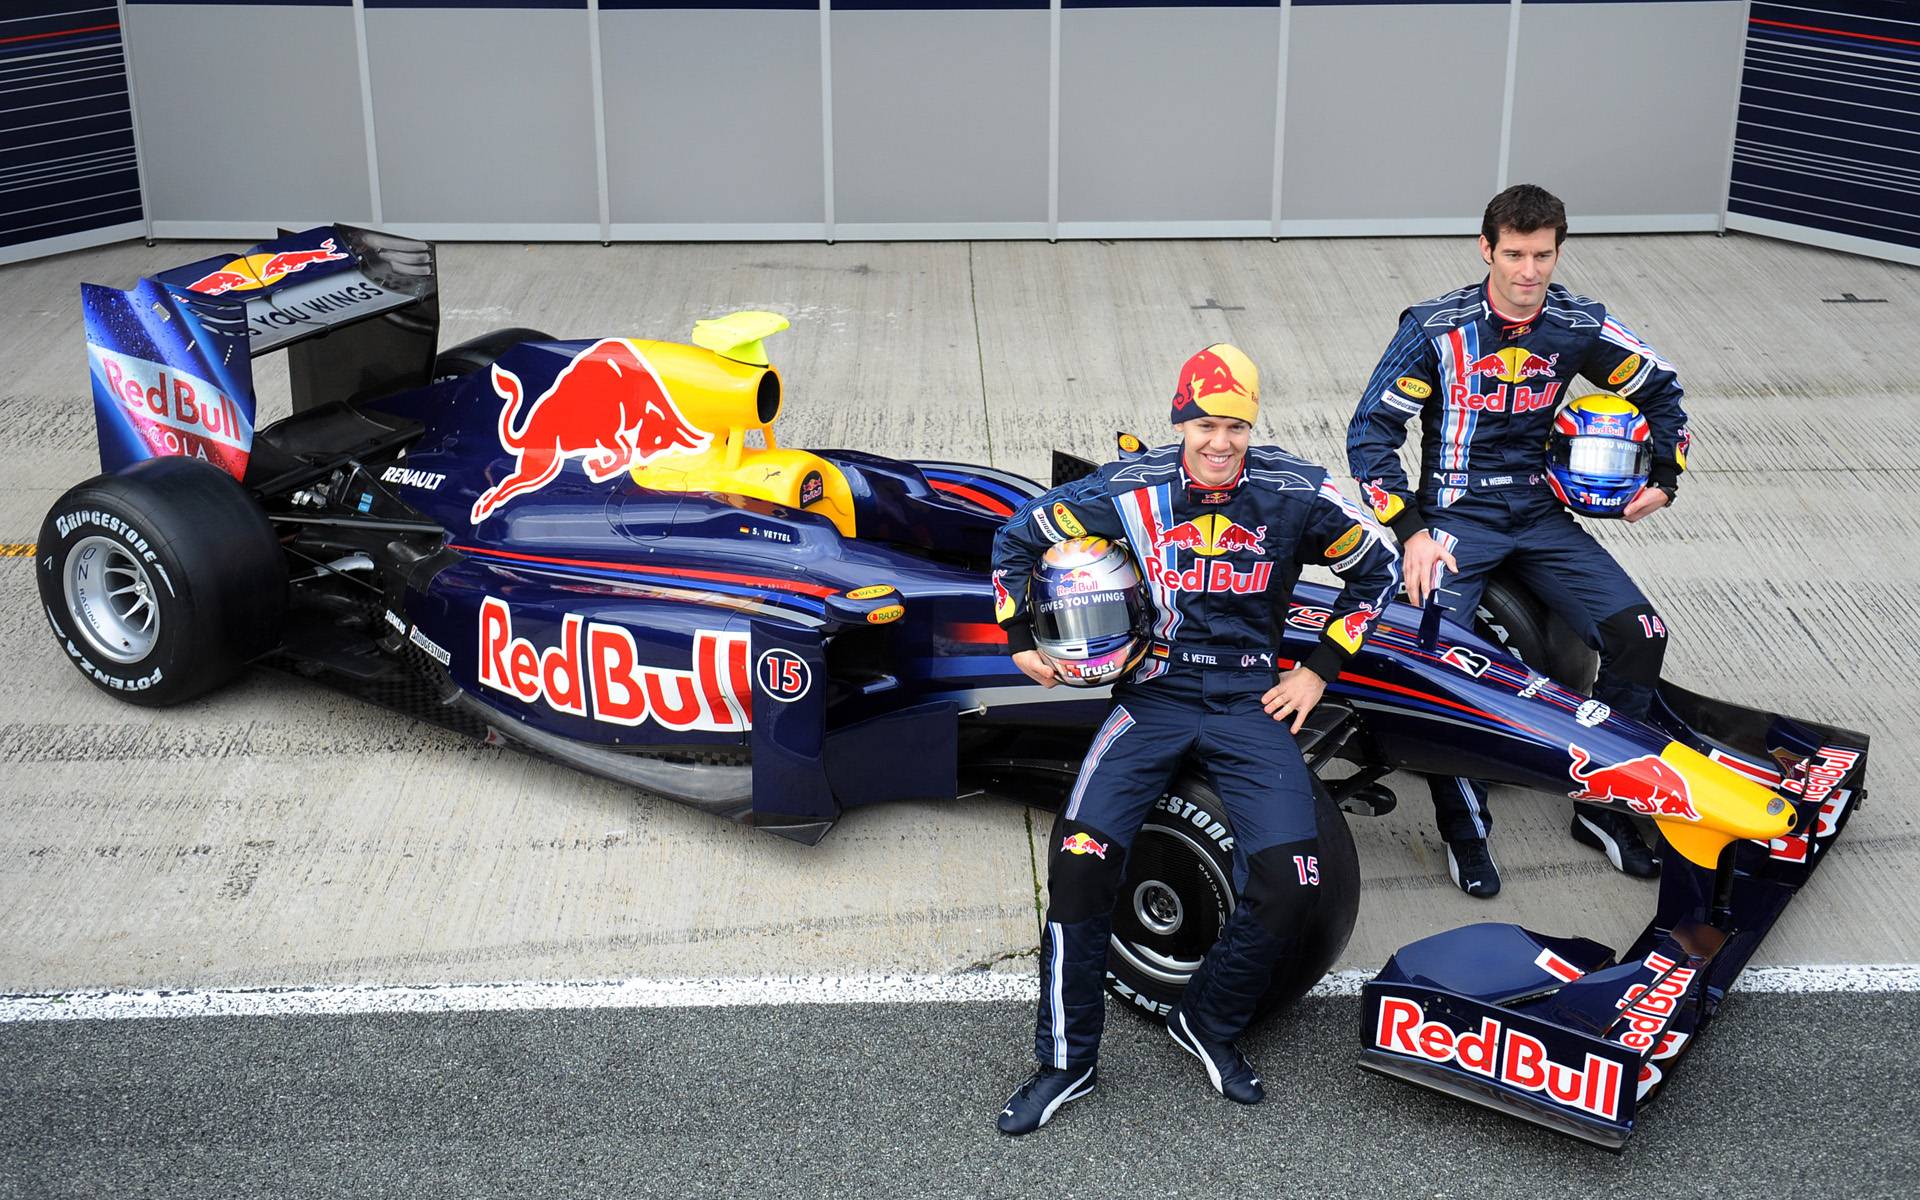 The sustained success demonstrated by the Infiniti Red Bull team has been nearly unmatched in Formula One racing. From 2010 to 2012, the team won three ...